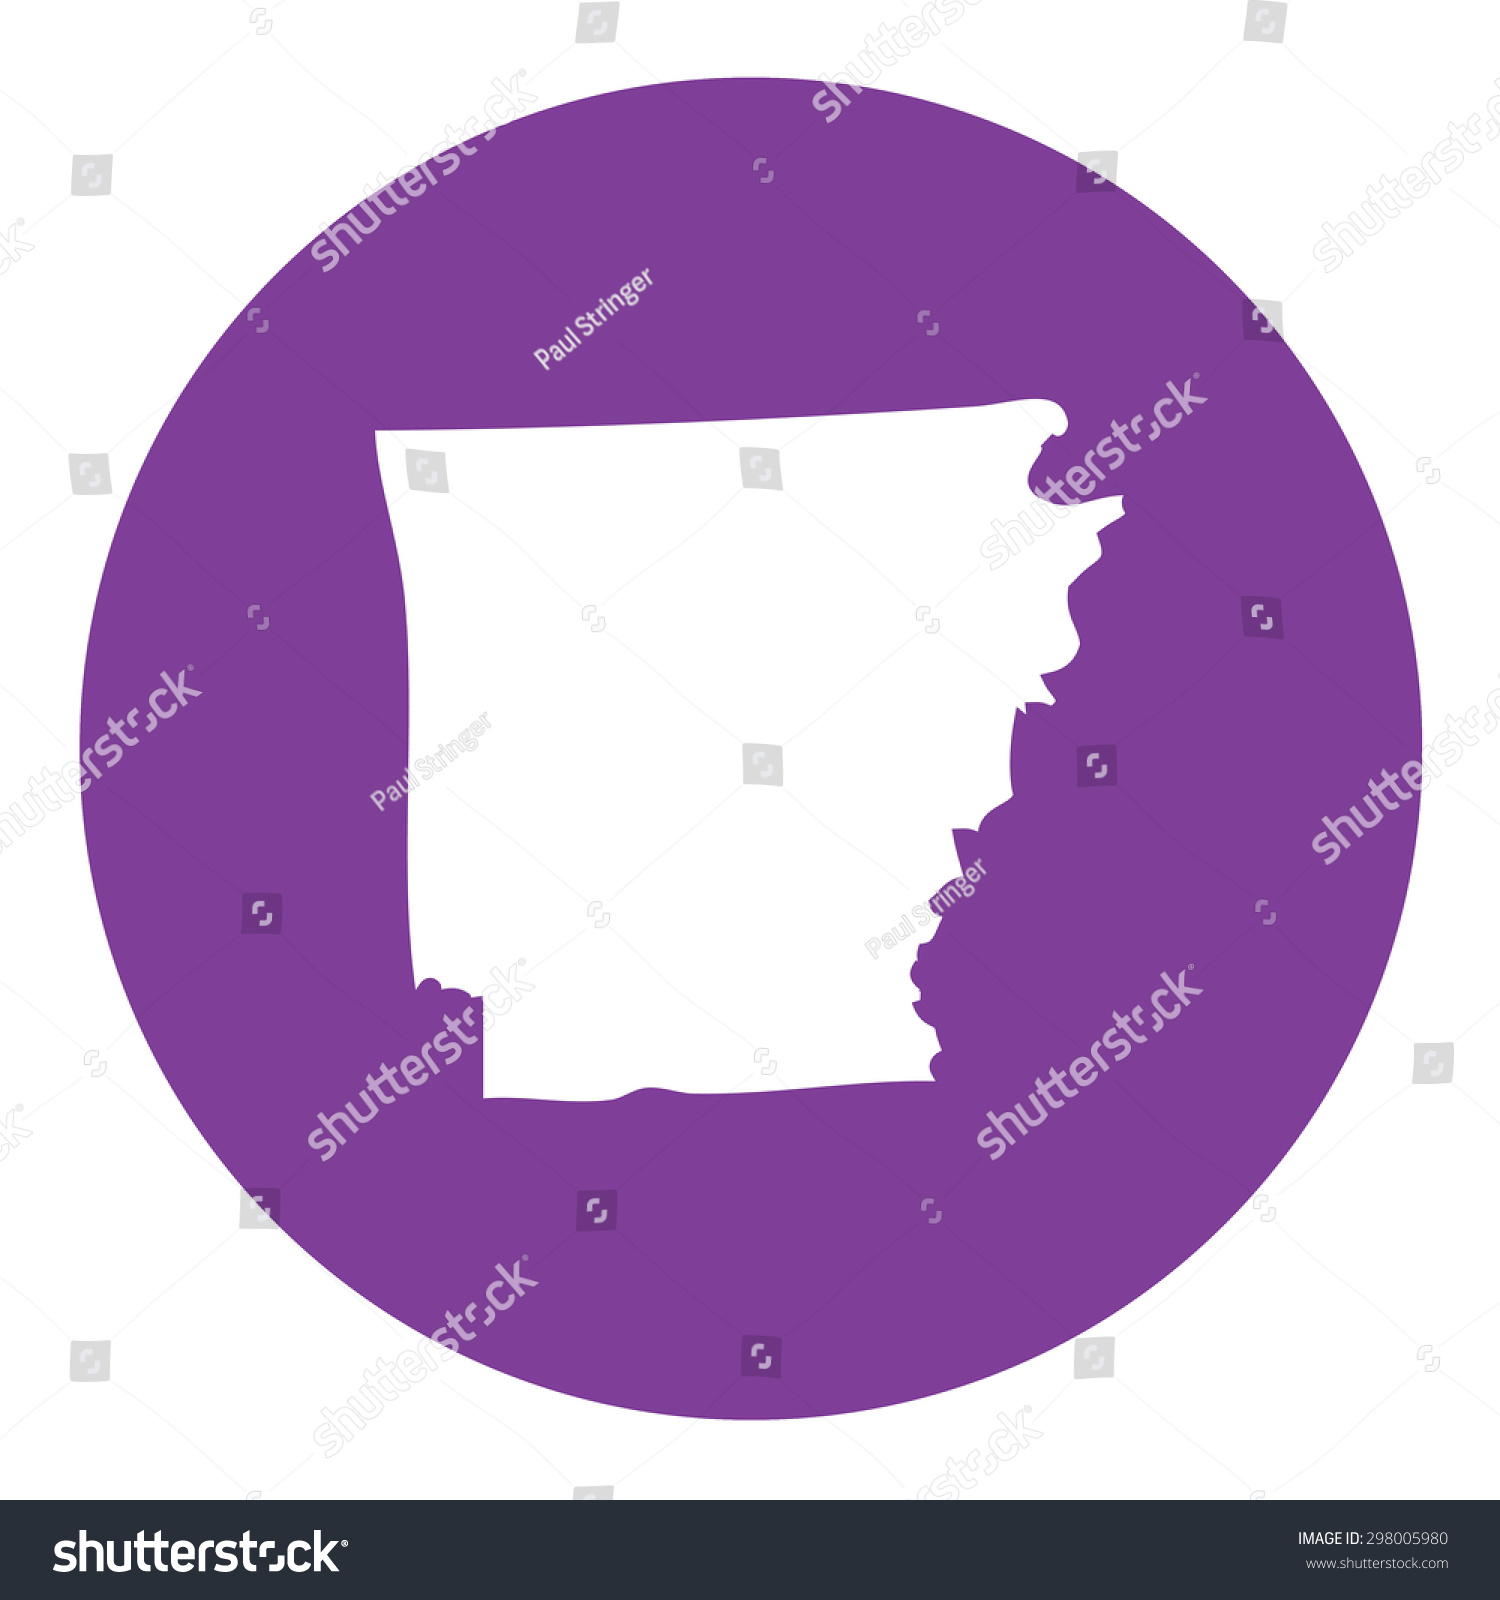 Highly detailed map inside a circle of the state of Arkansas #298005980